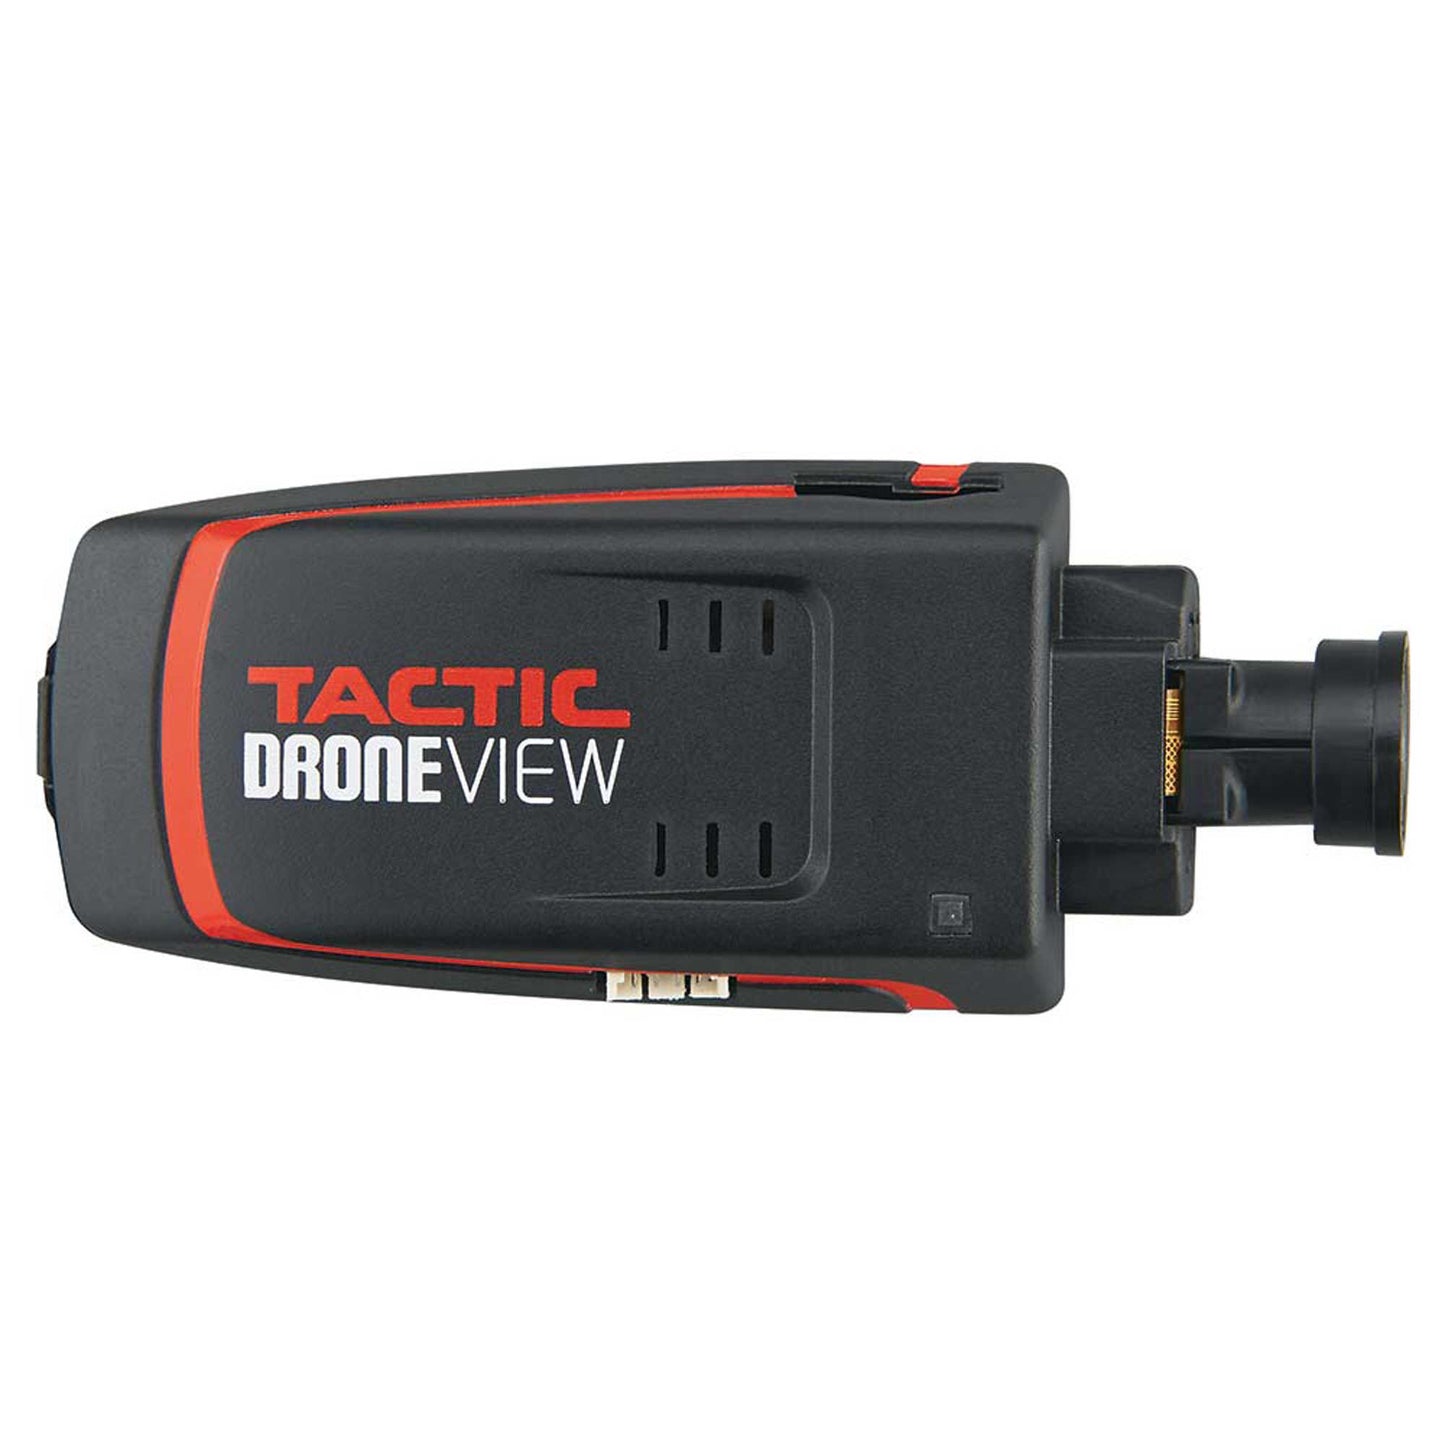 Vista FPV Conversion Kit with DroneView Camera